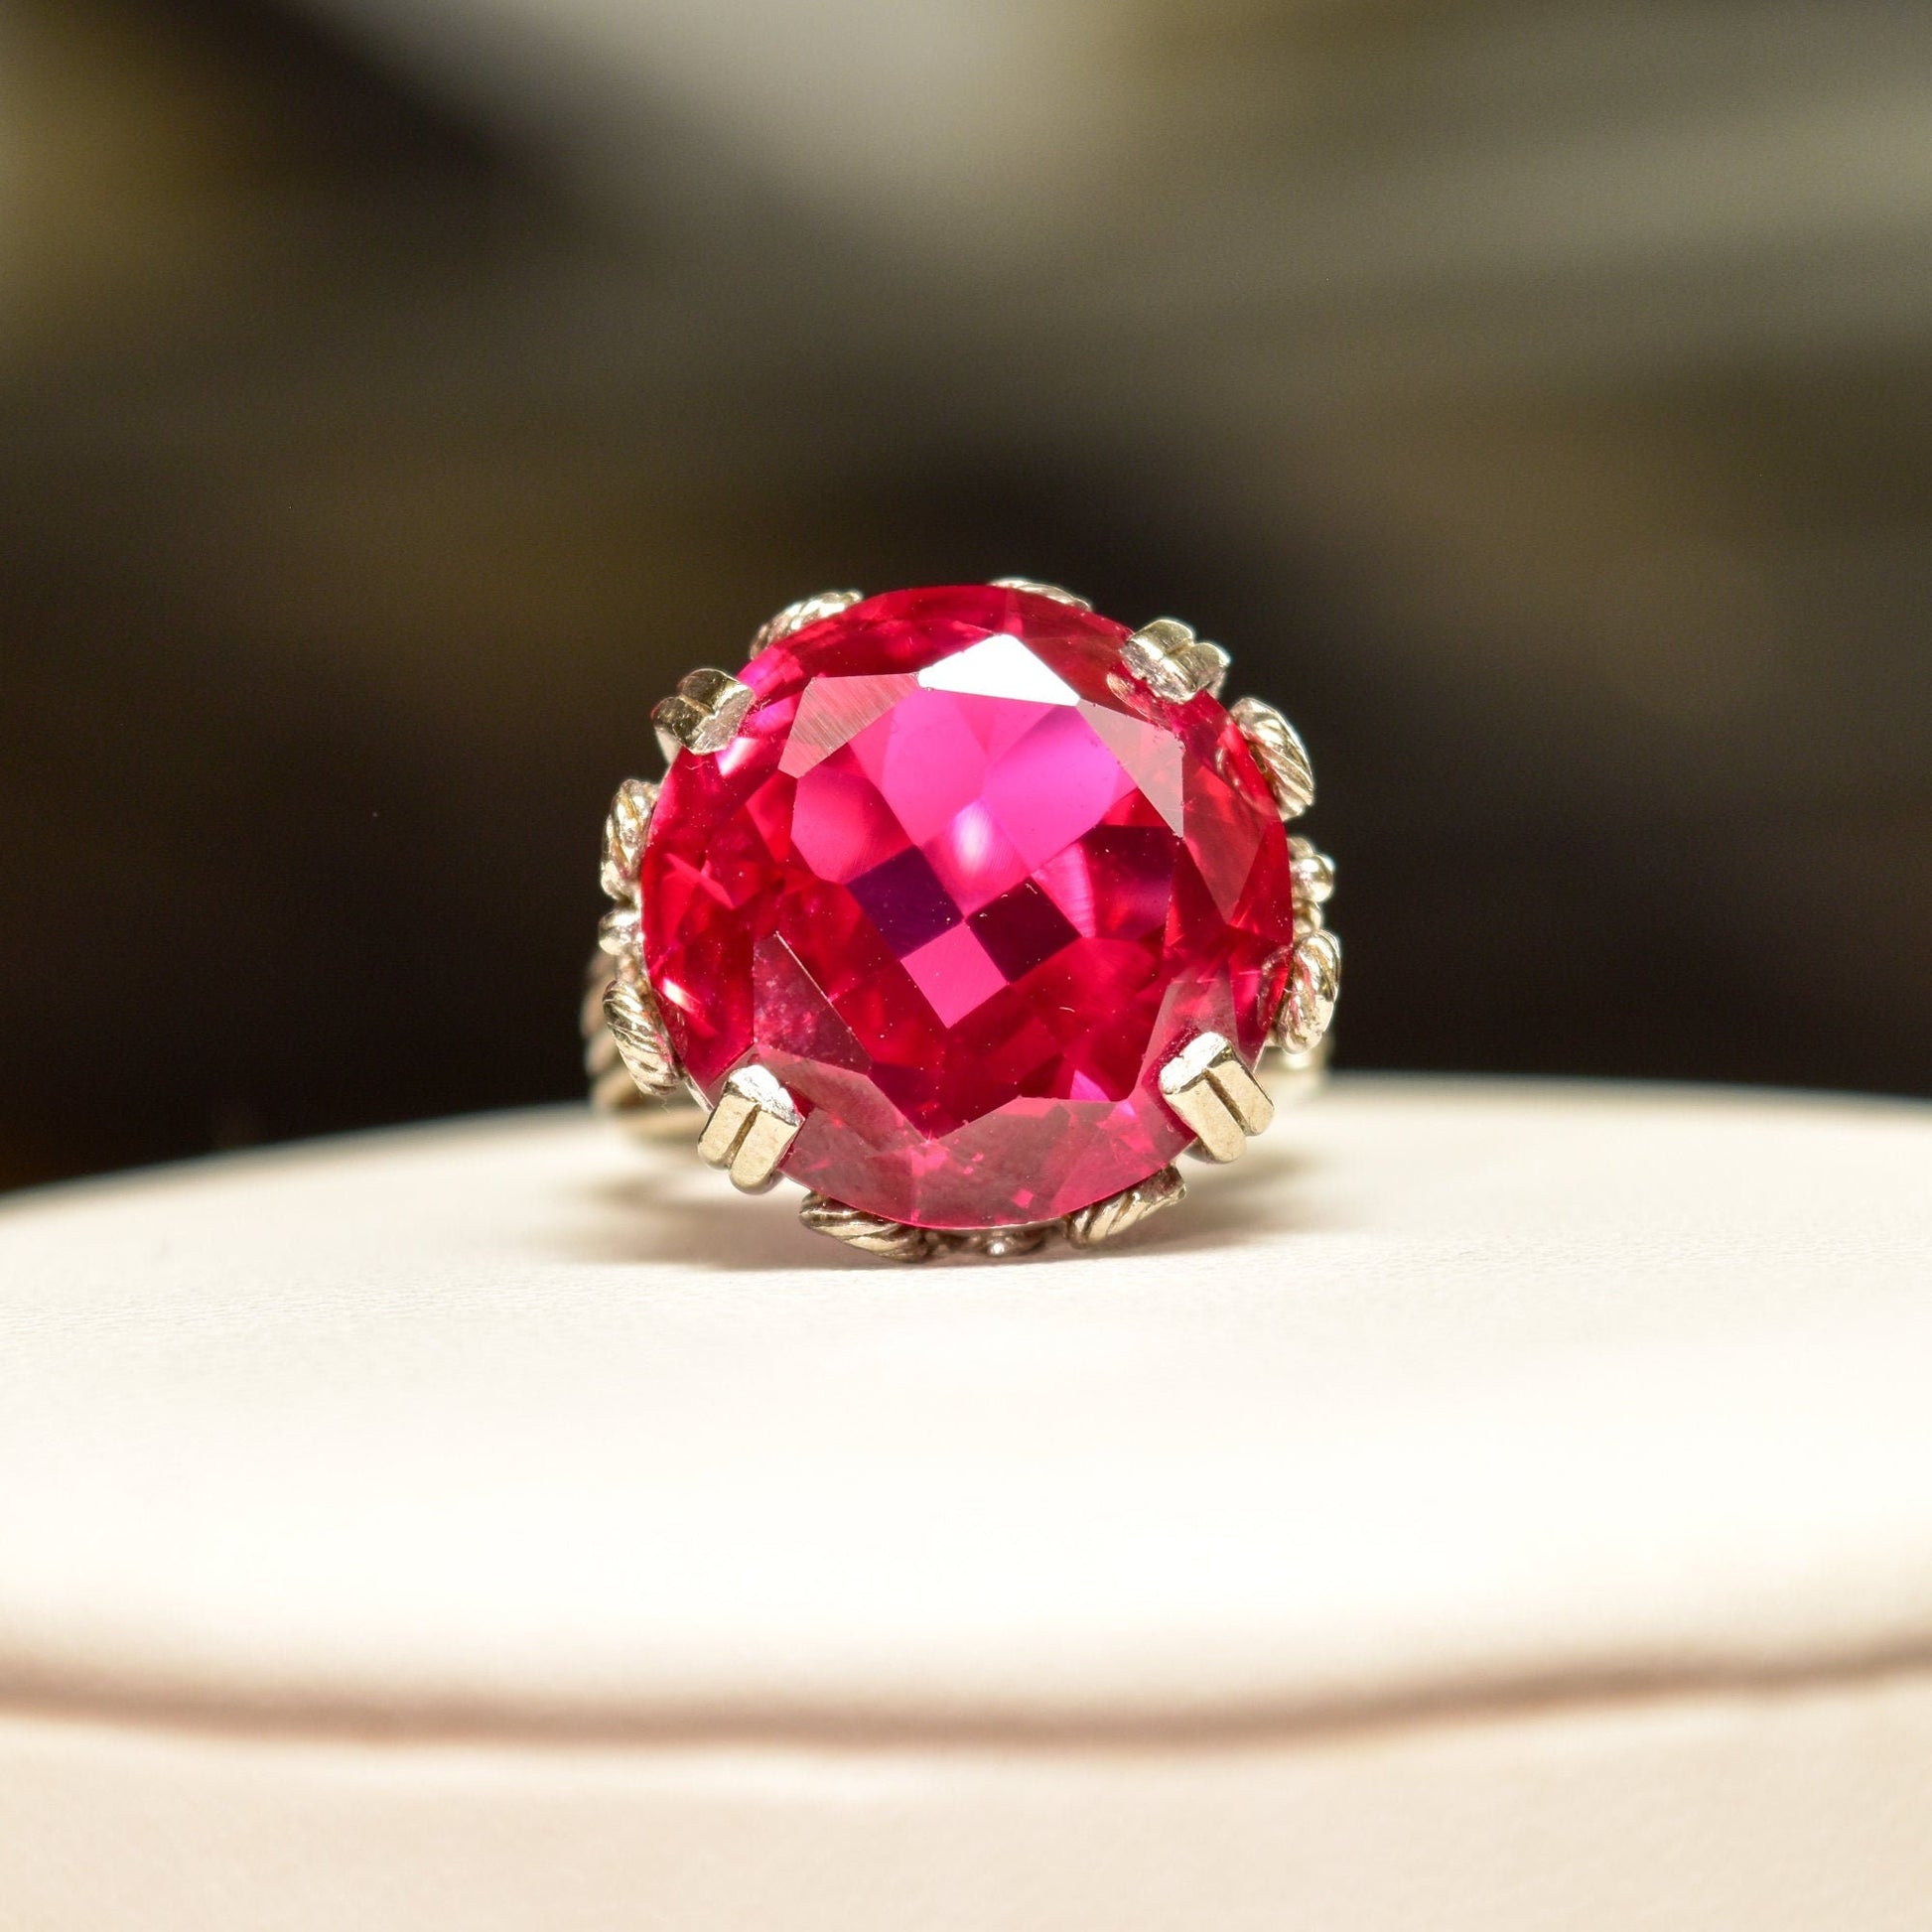 Ornate filigree 10K white gold cocktail ring with large, round faceted pink synthetic ruby gemstone, size 6 3/4 US, shown on white background.